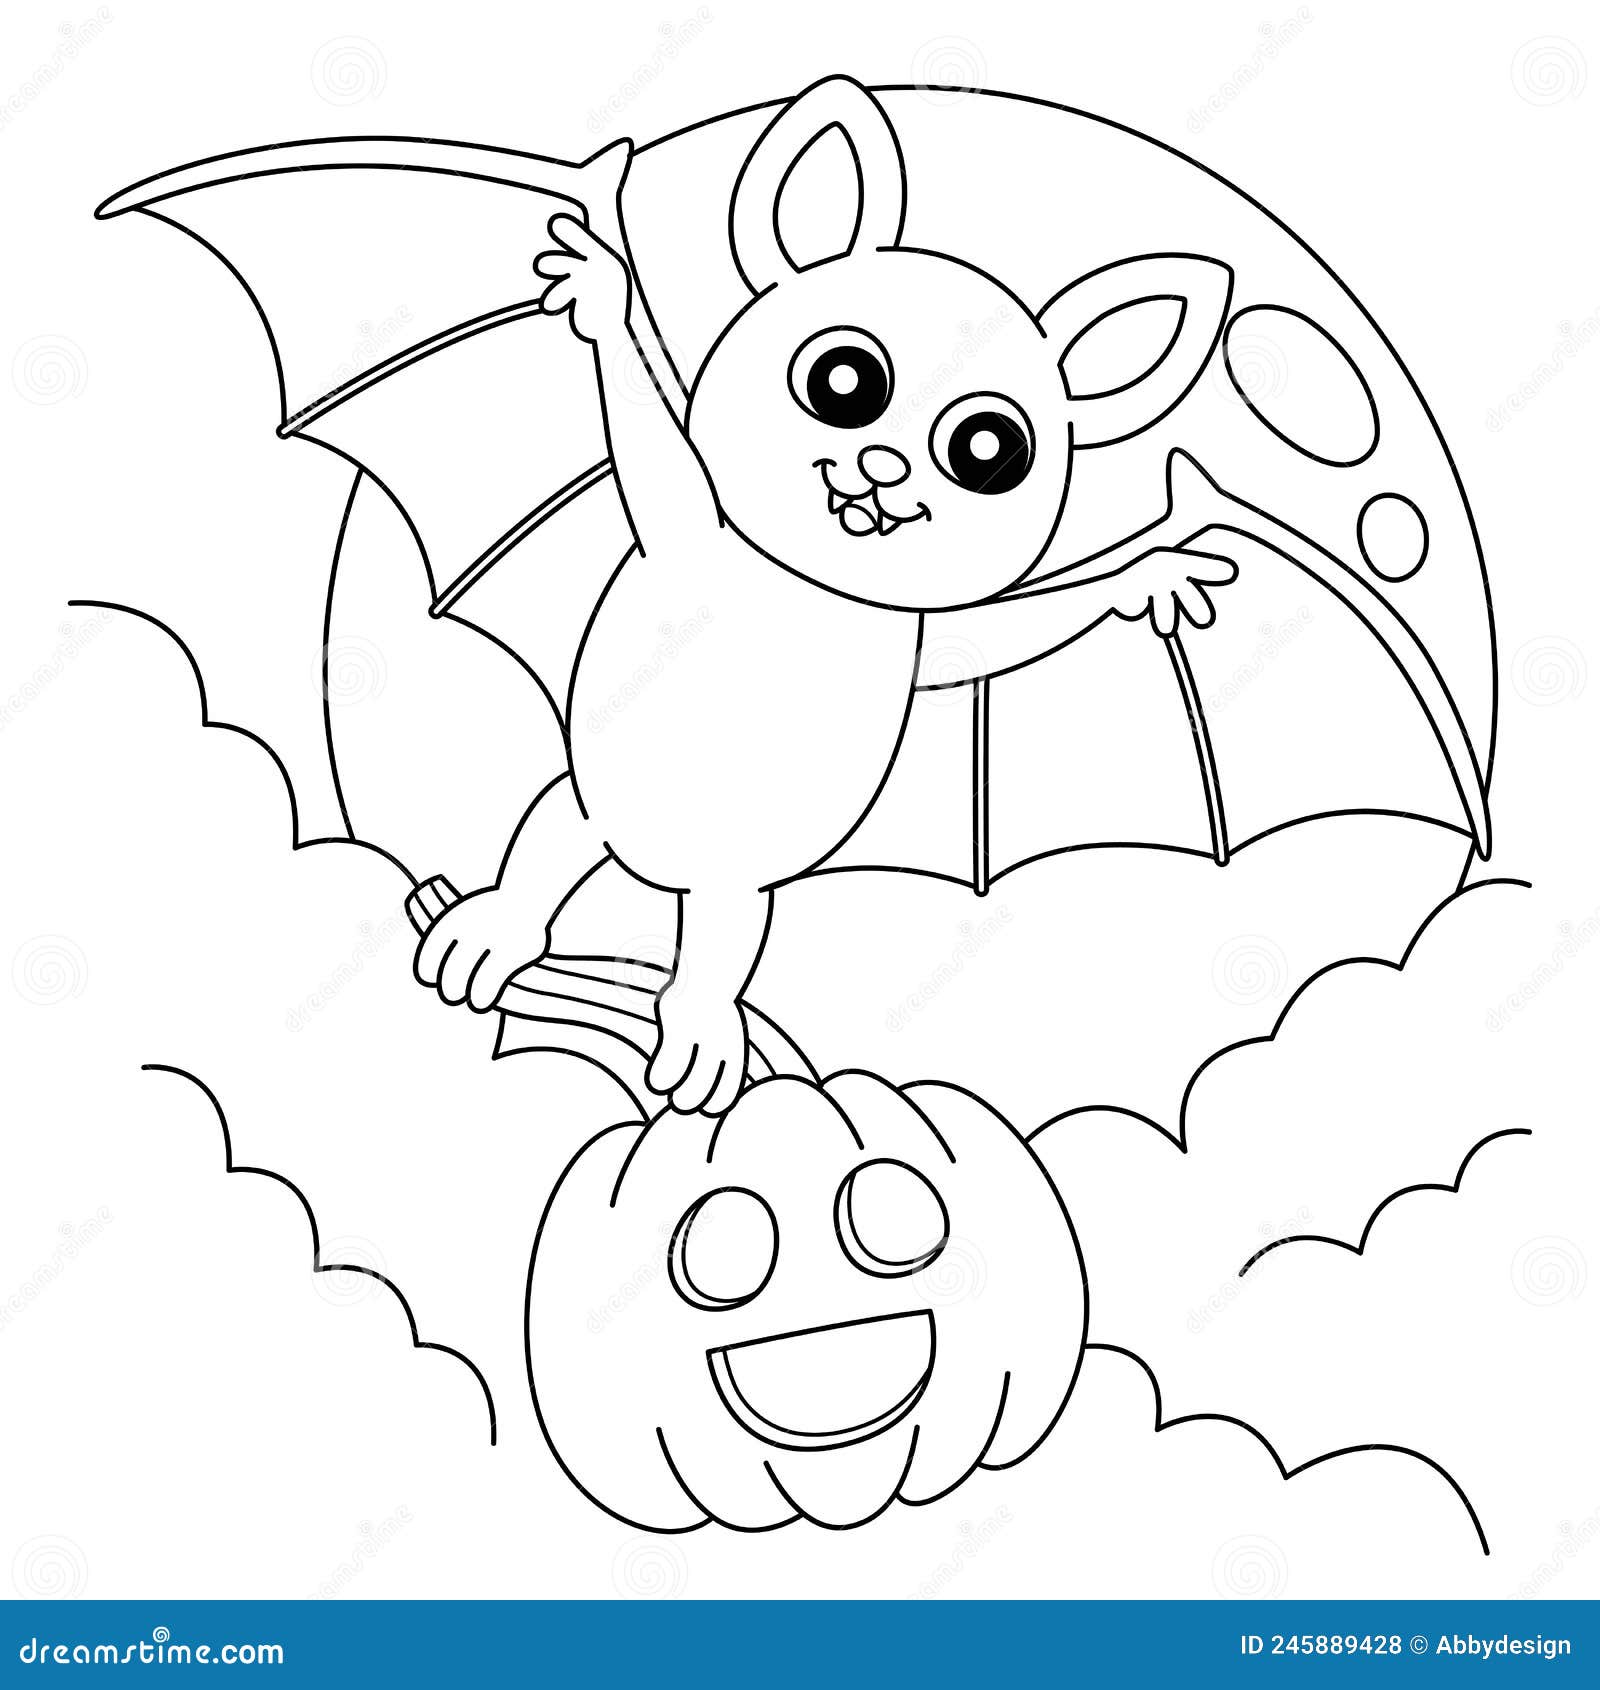 Flying bat halloween coloring page for kids stock vector